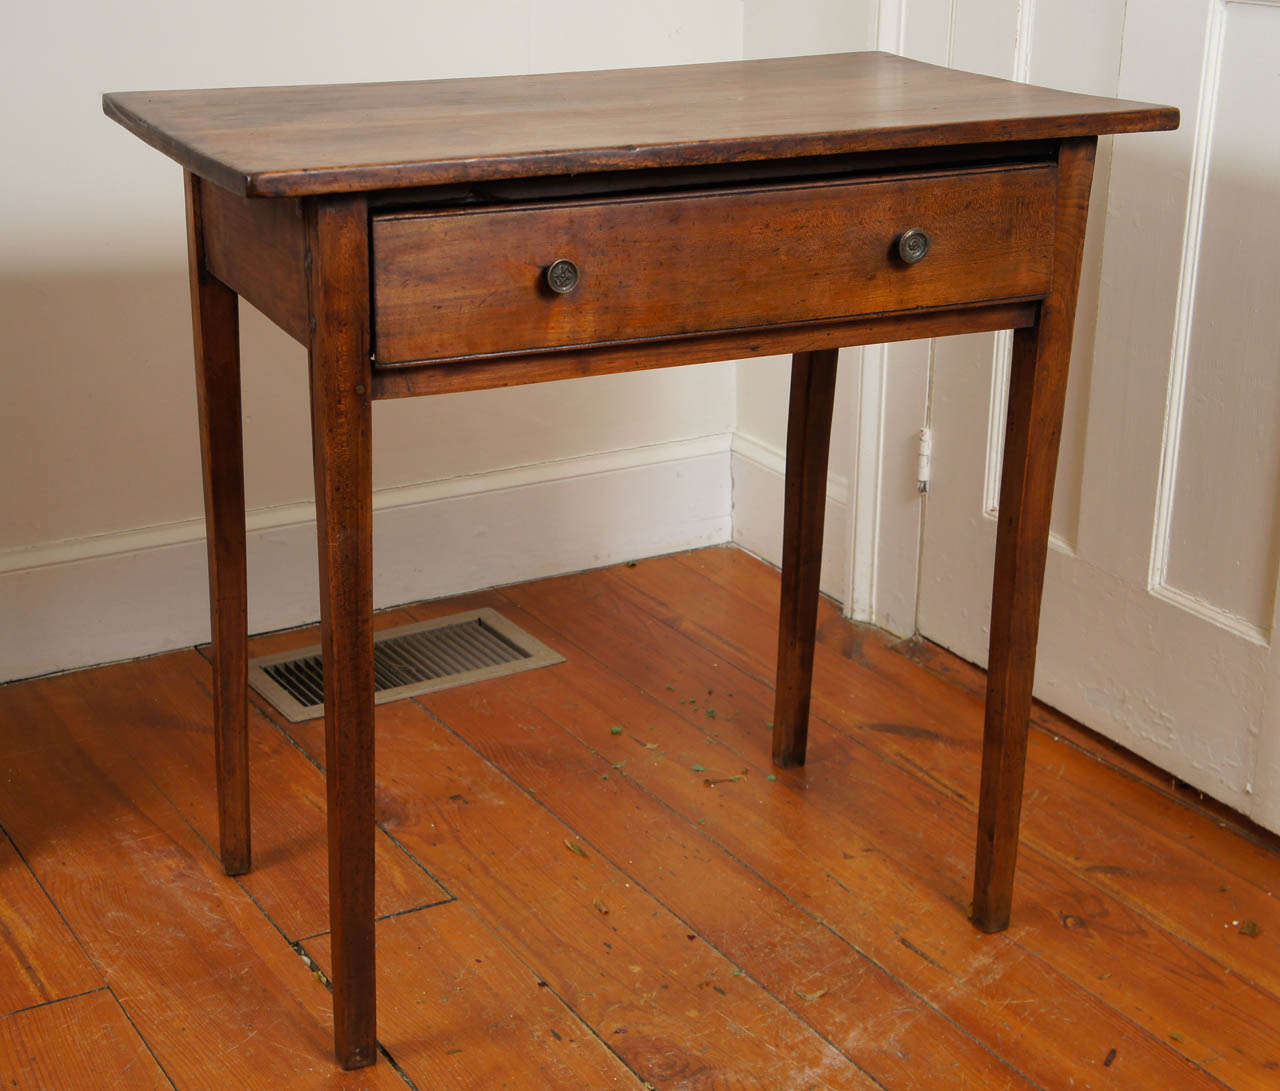 This rich fruit wood end or side table has one drawer and two original metal knobs and lovely legs. It’s the patina and size that makes this table a perfect end table in any room in the house.